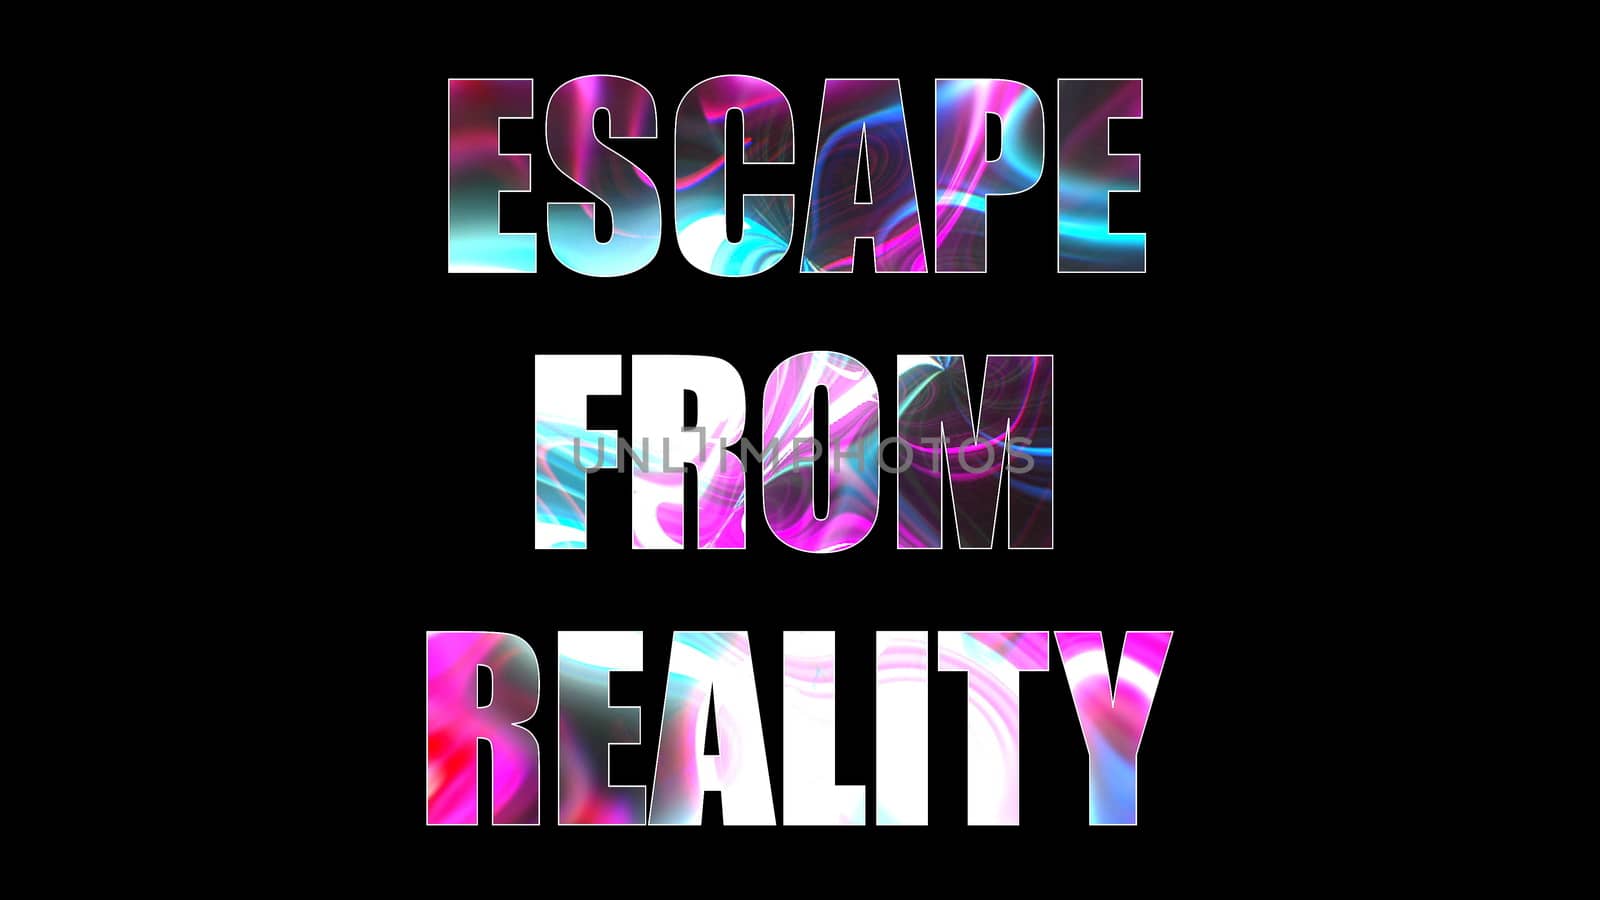 Letters of bright shiny Escape from reality text, 3d render background, computer generating for gaming by nolimit046